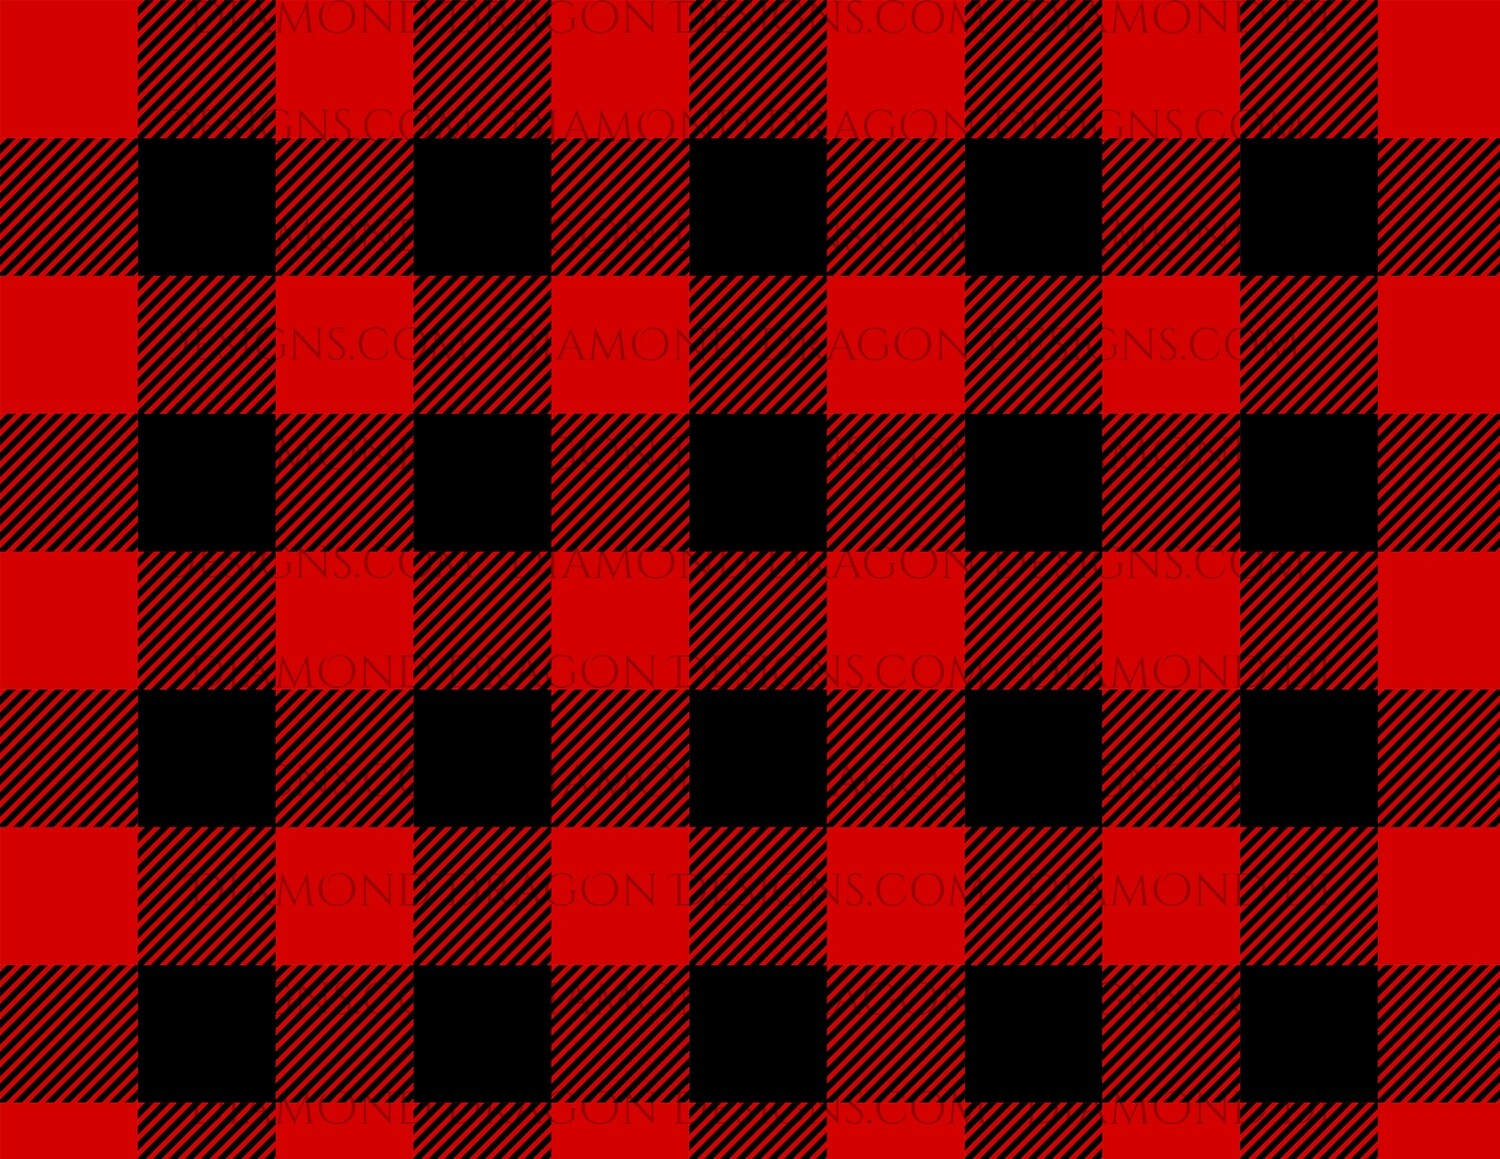 Full Page - Red Buffalo Plaid, Black and Red, Full Page Design - Waterslide